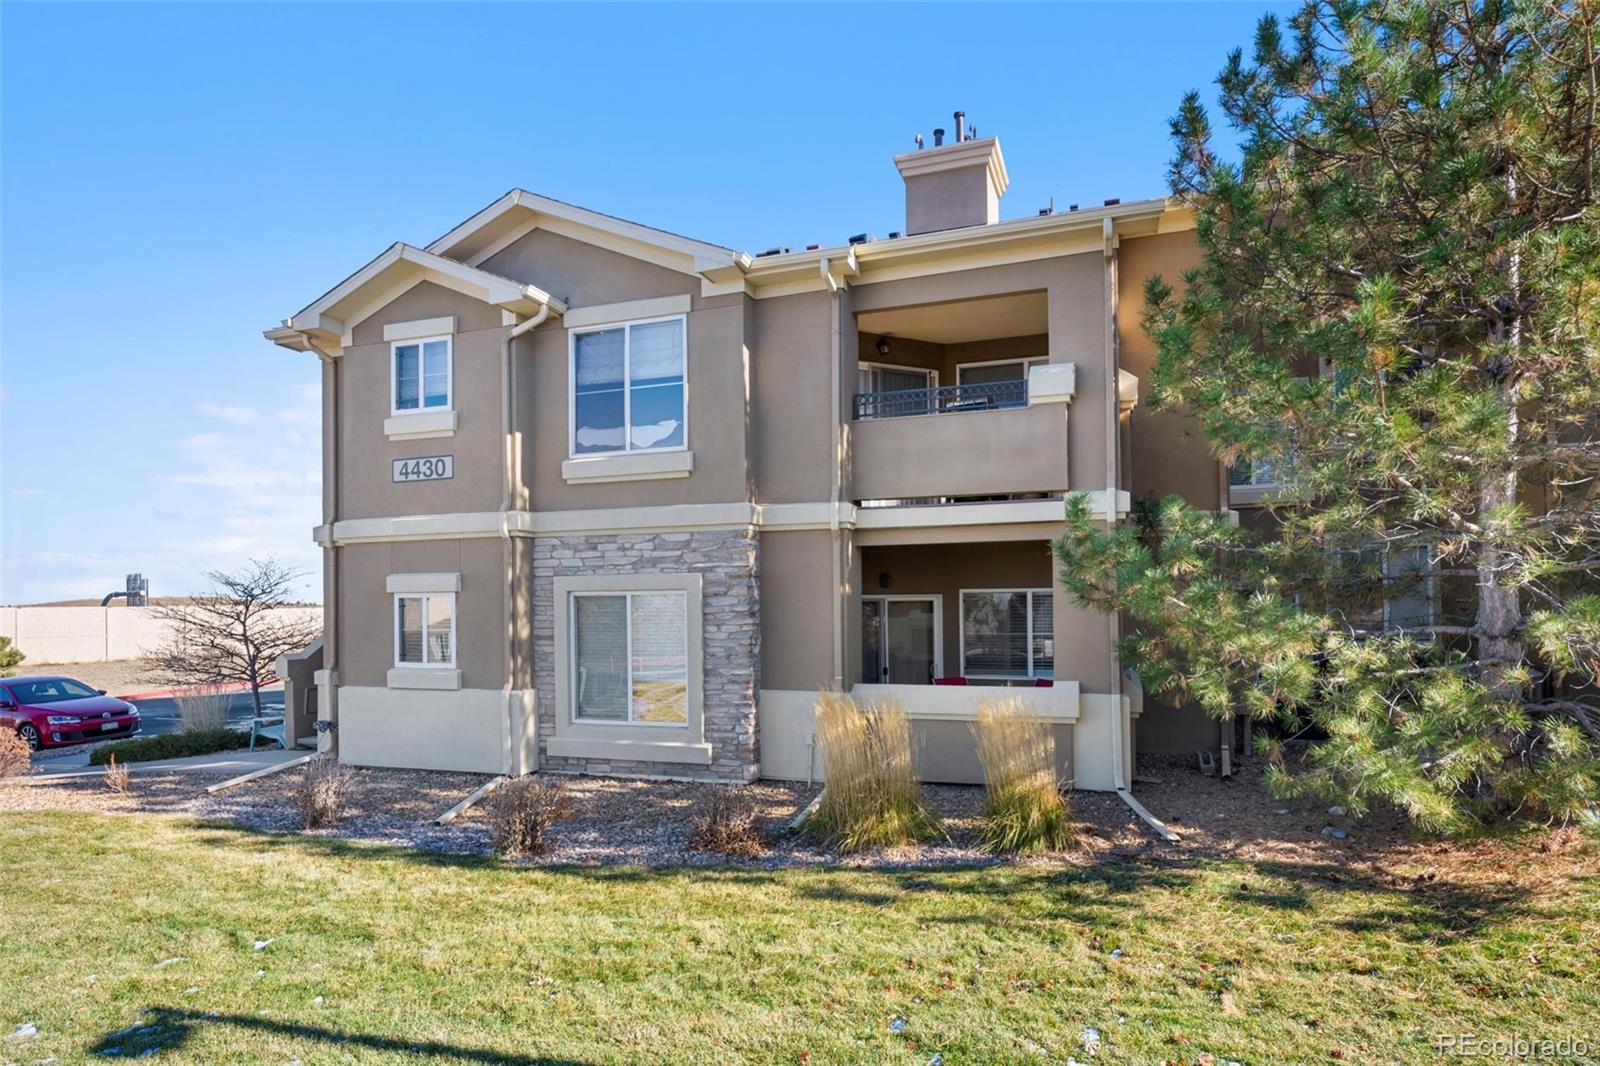 4430  copeland loop, Highlands Ranch sold home. Closed on 2024-01-18 for $380,000.